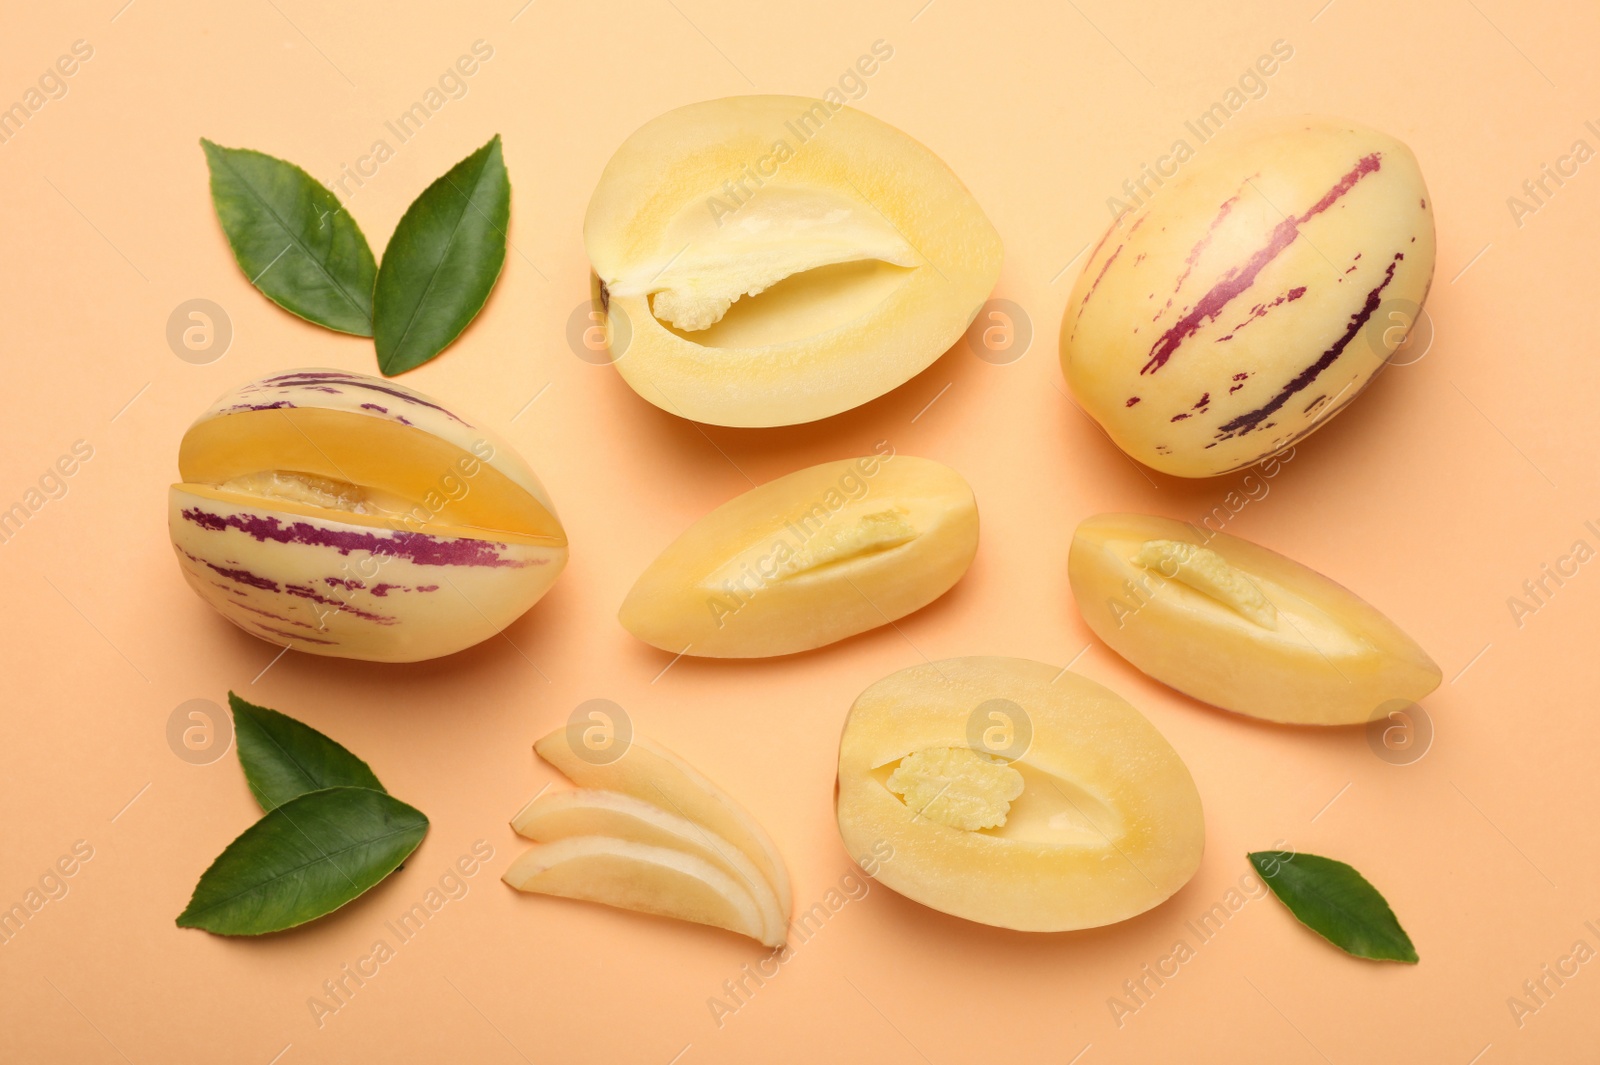 Photo of Whole and cut pepino melons with green leaves on beige background, flat lay